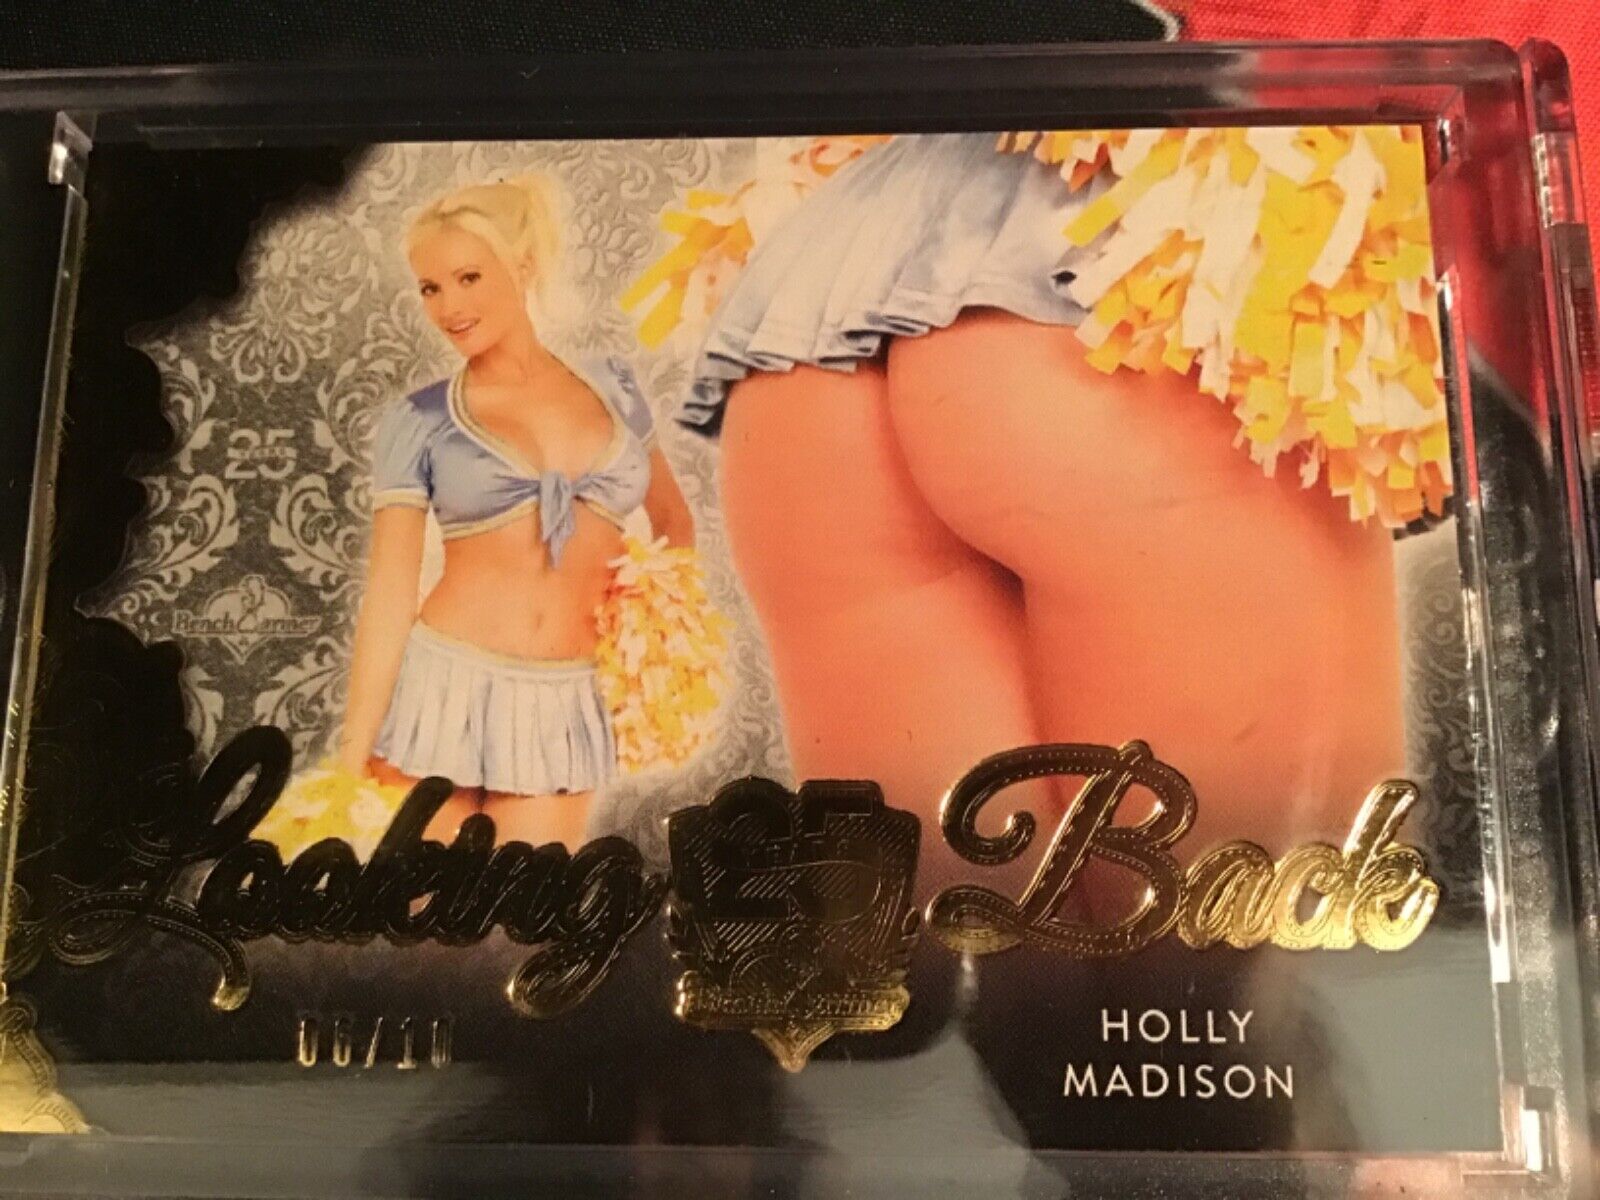 Holly Madison 2018 benchwarmer gold looking back 6\\10